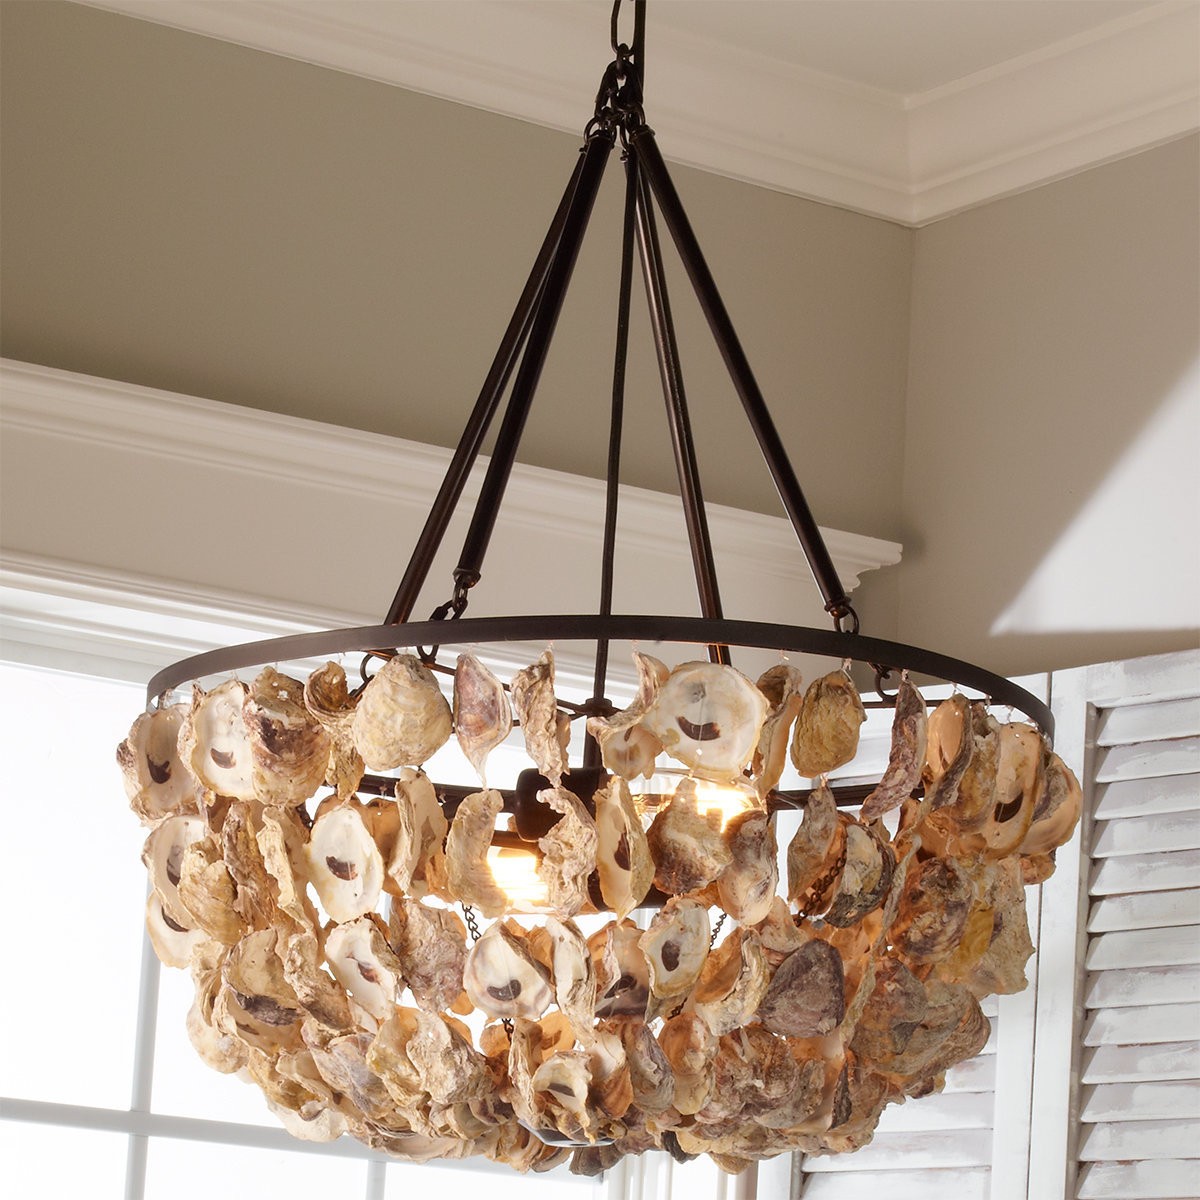 Oyster shell basket chandelier shades of light 1